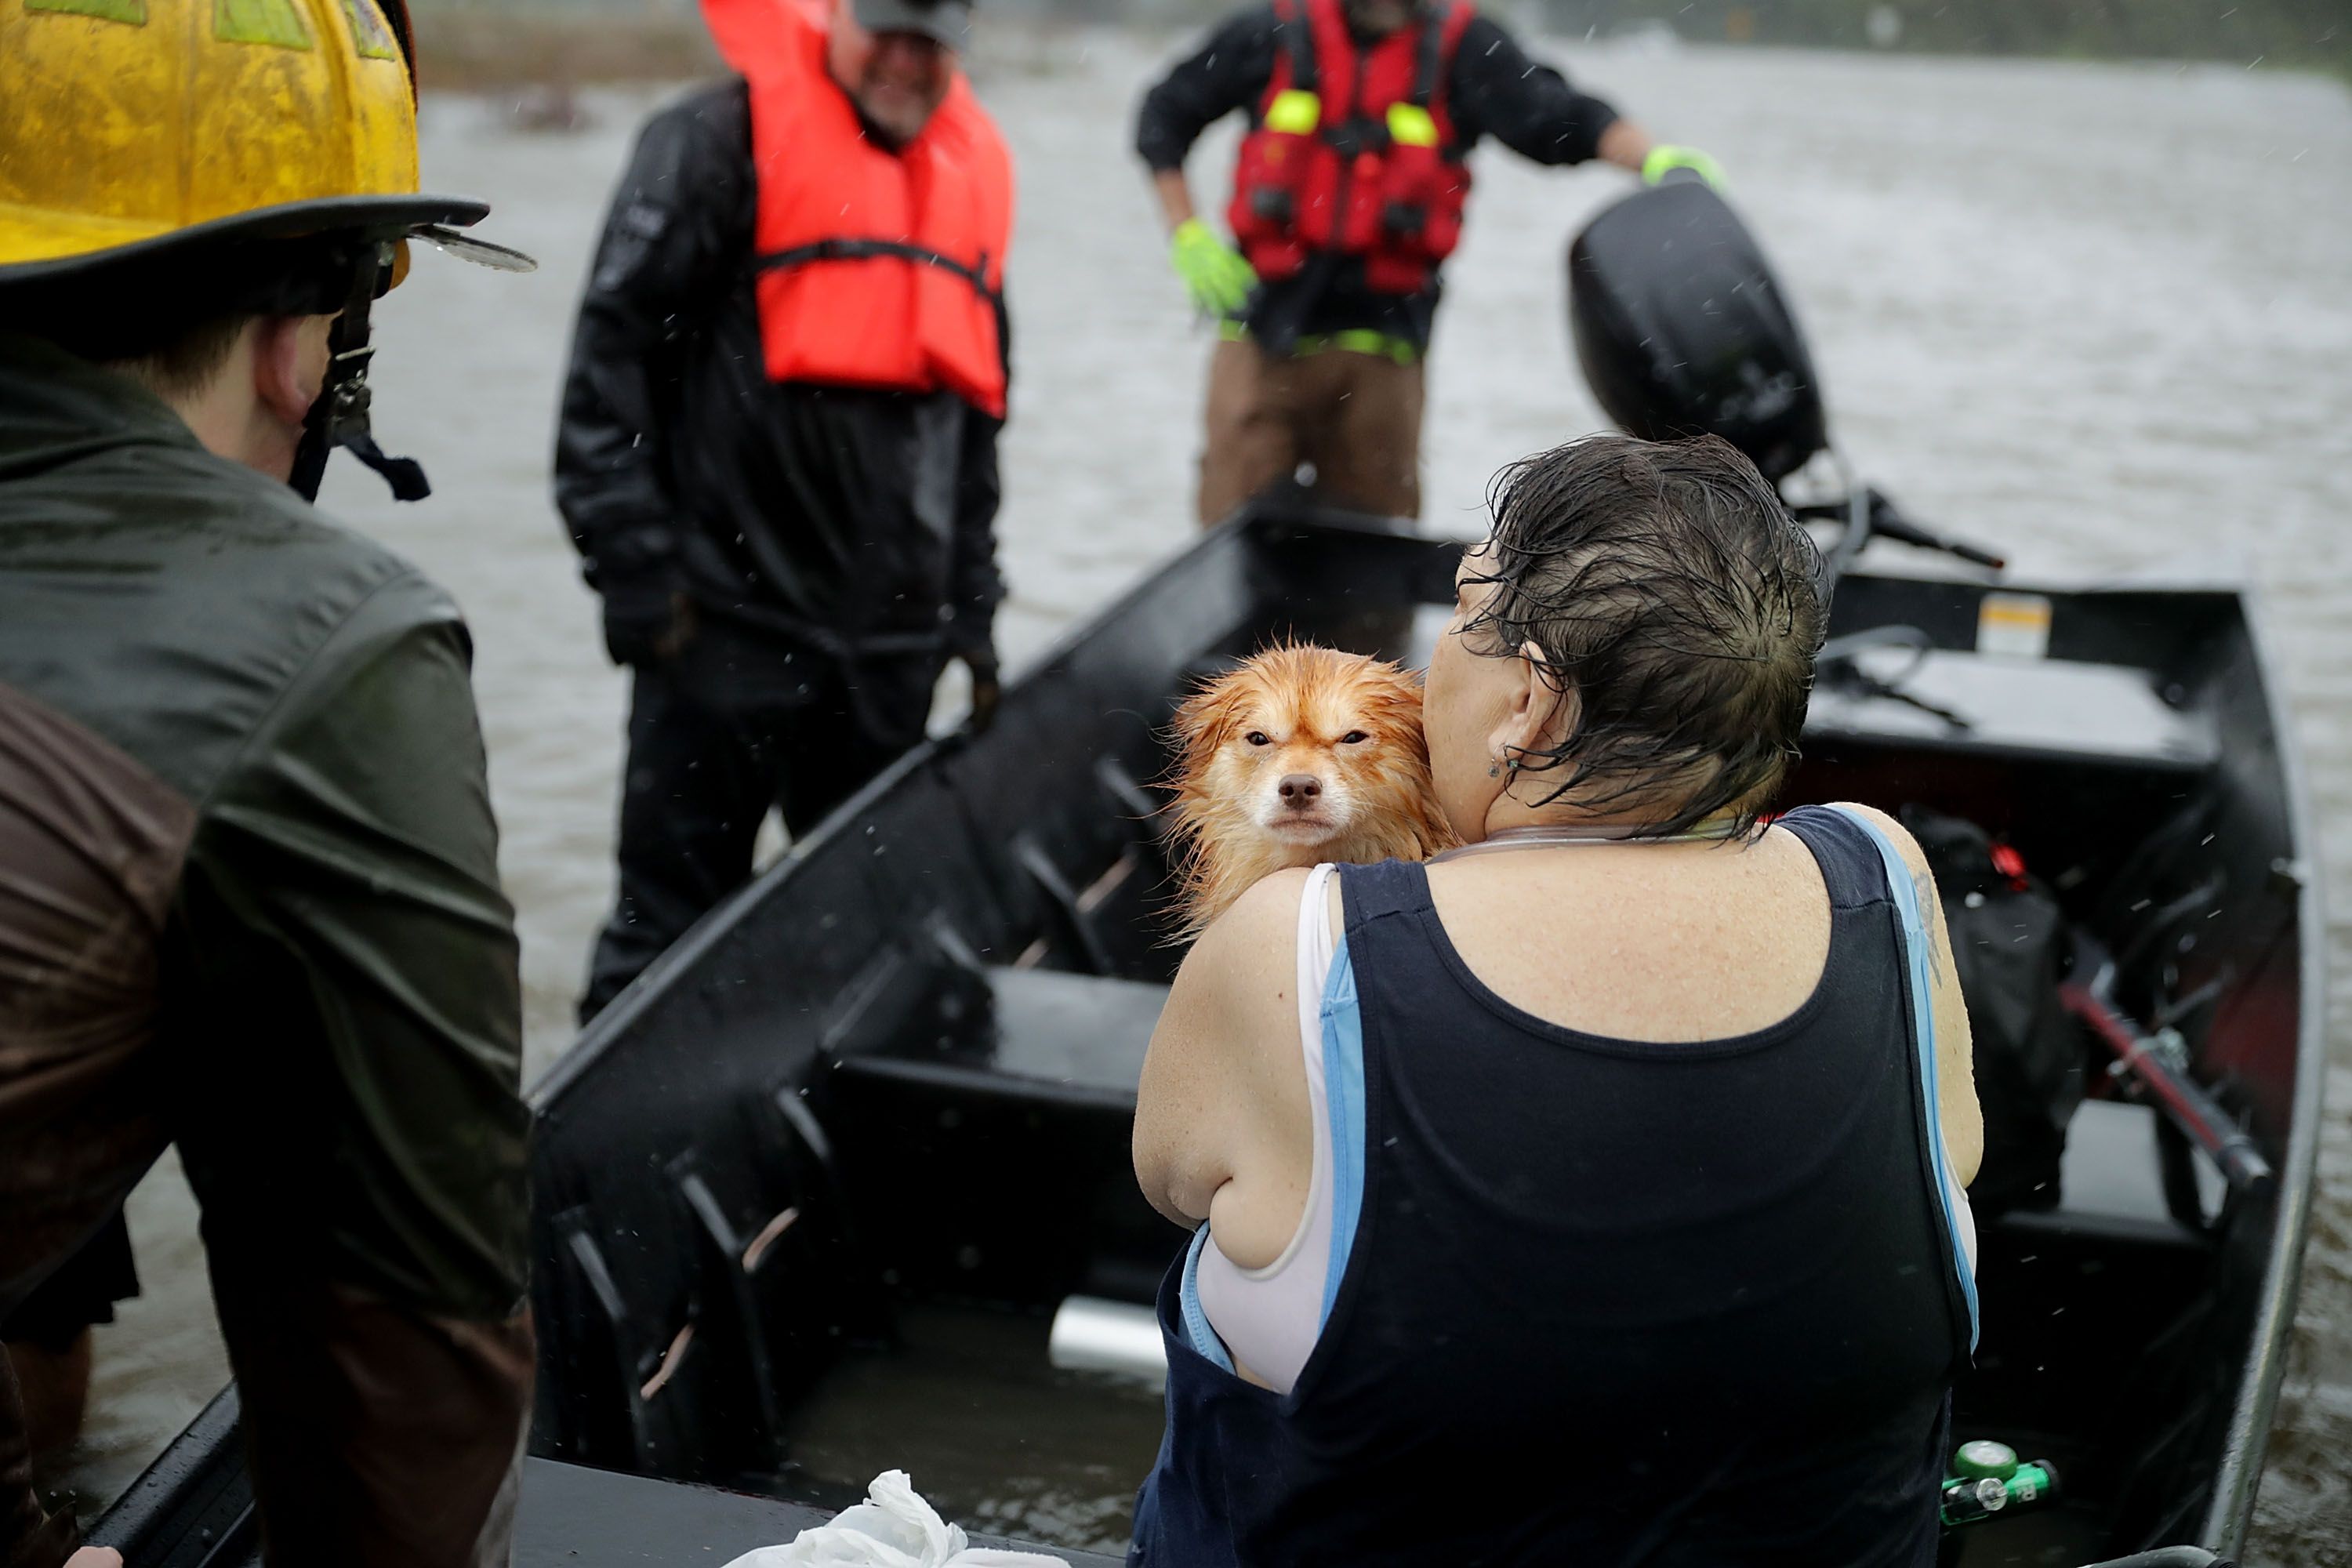 Rescue workers from Township No. 7 Fire Department and volunteers from the Civilian Crisis Response Team use a boat to rescue a woman and her dog from their flooded home during Hurricane Florence in James City, NC on Sept. 14, 2018. (Chip Somodevilla/Getty Images)